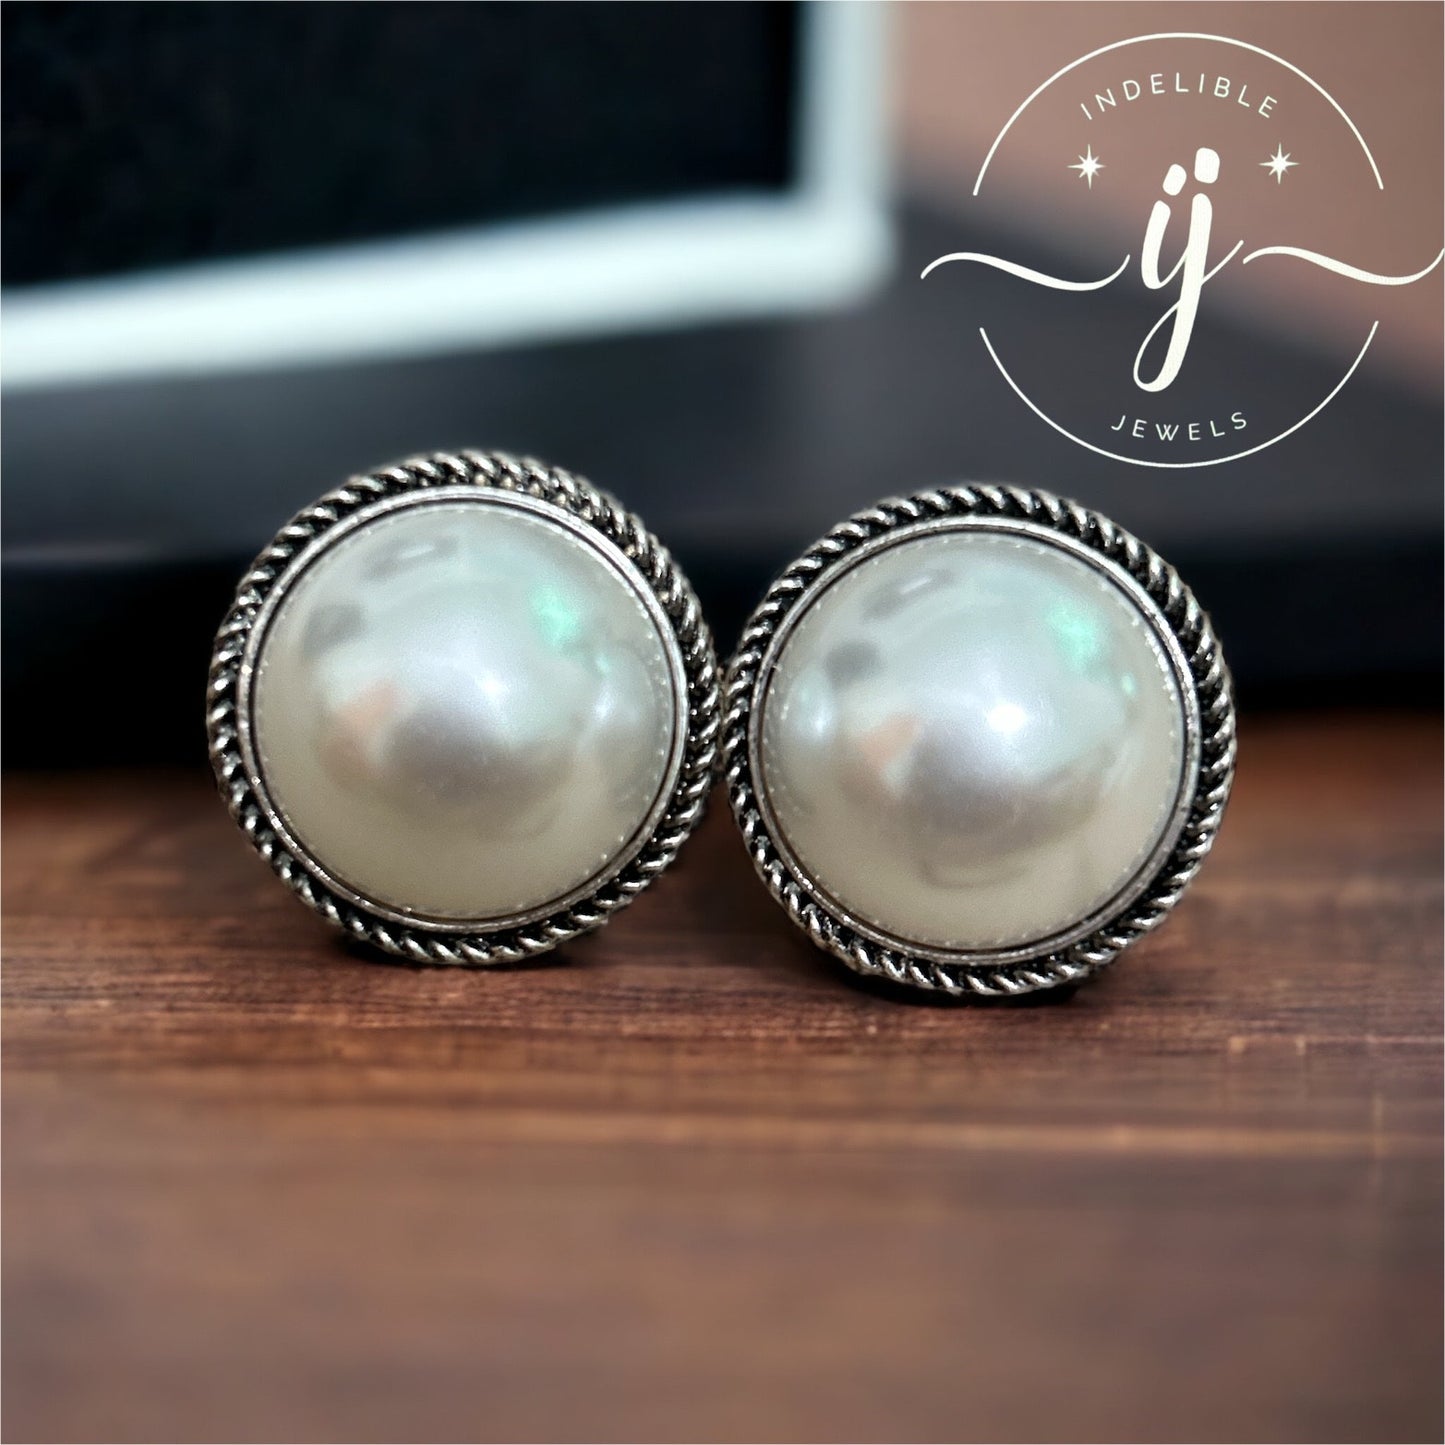 Gold / Silver Round Shaped Pearl Stud Earrings